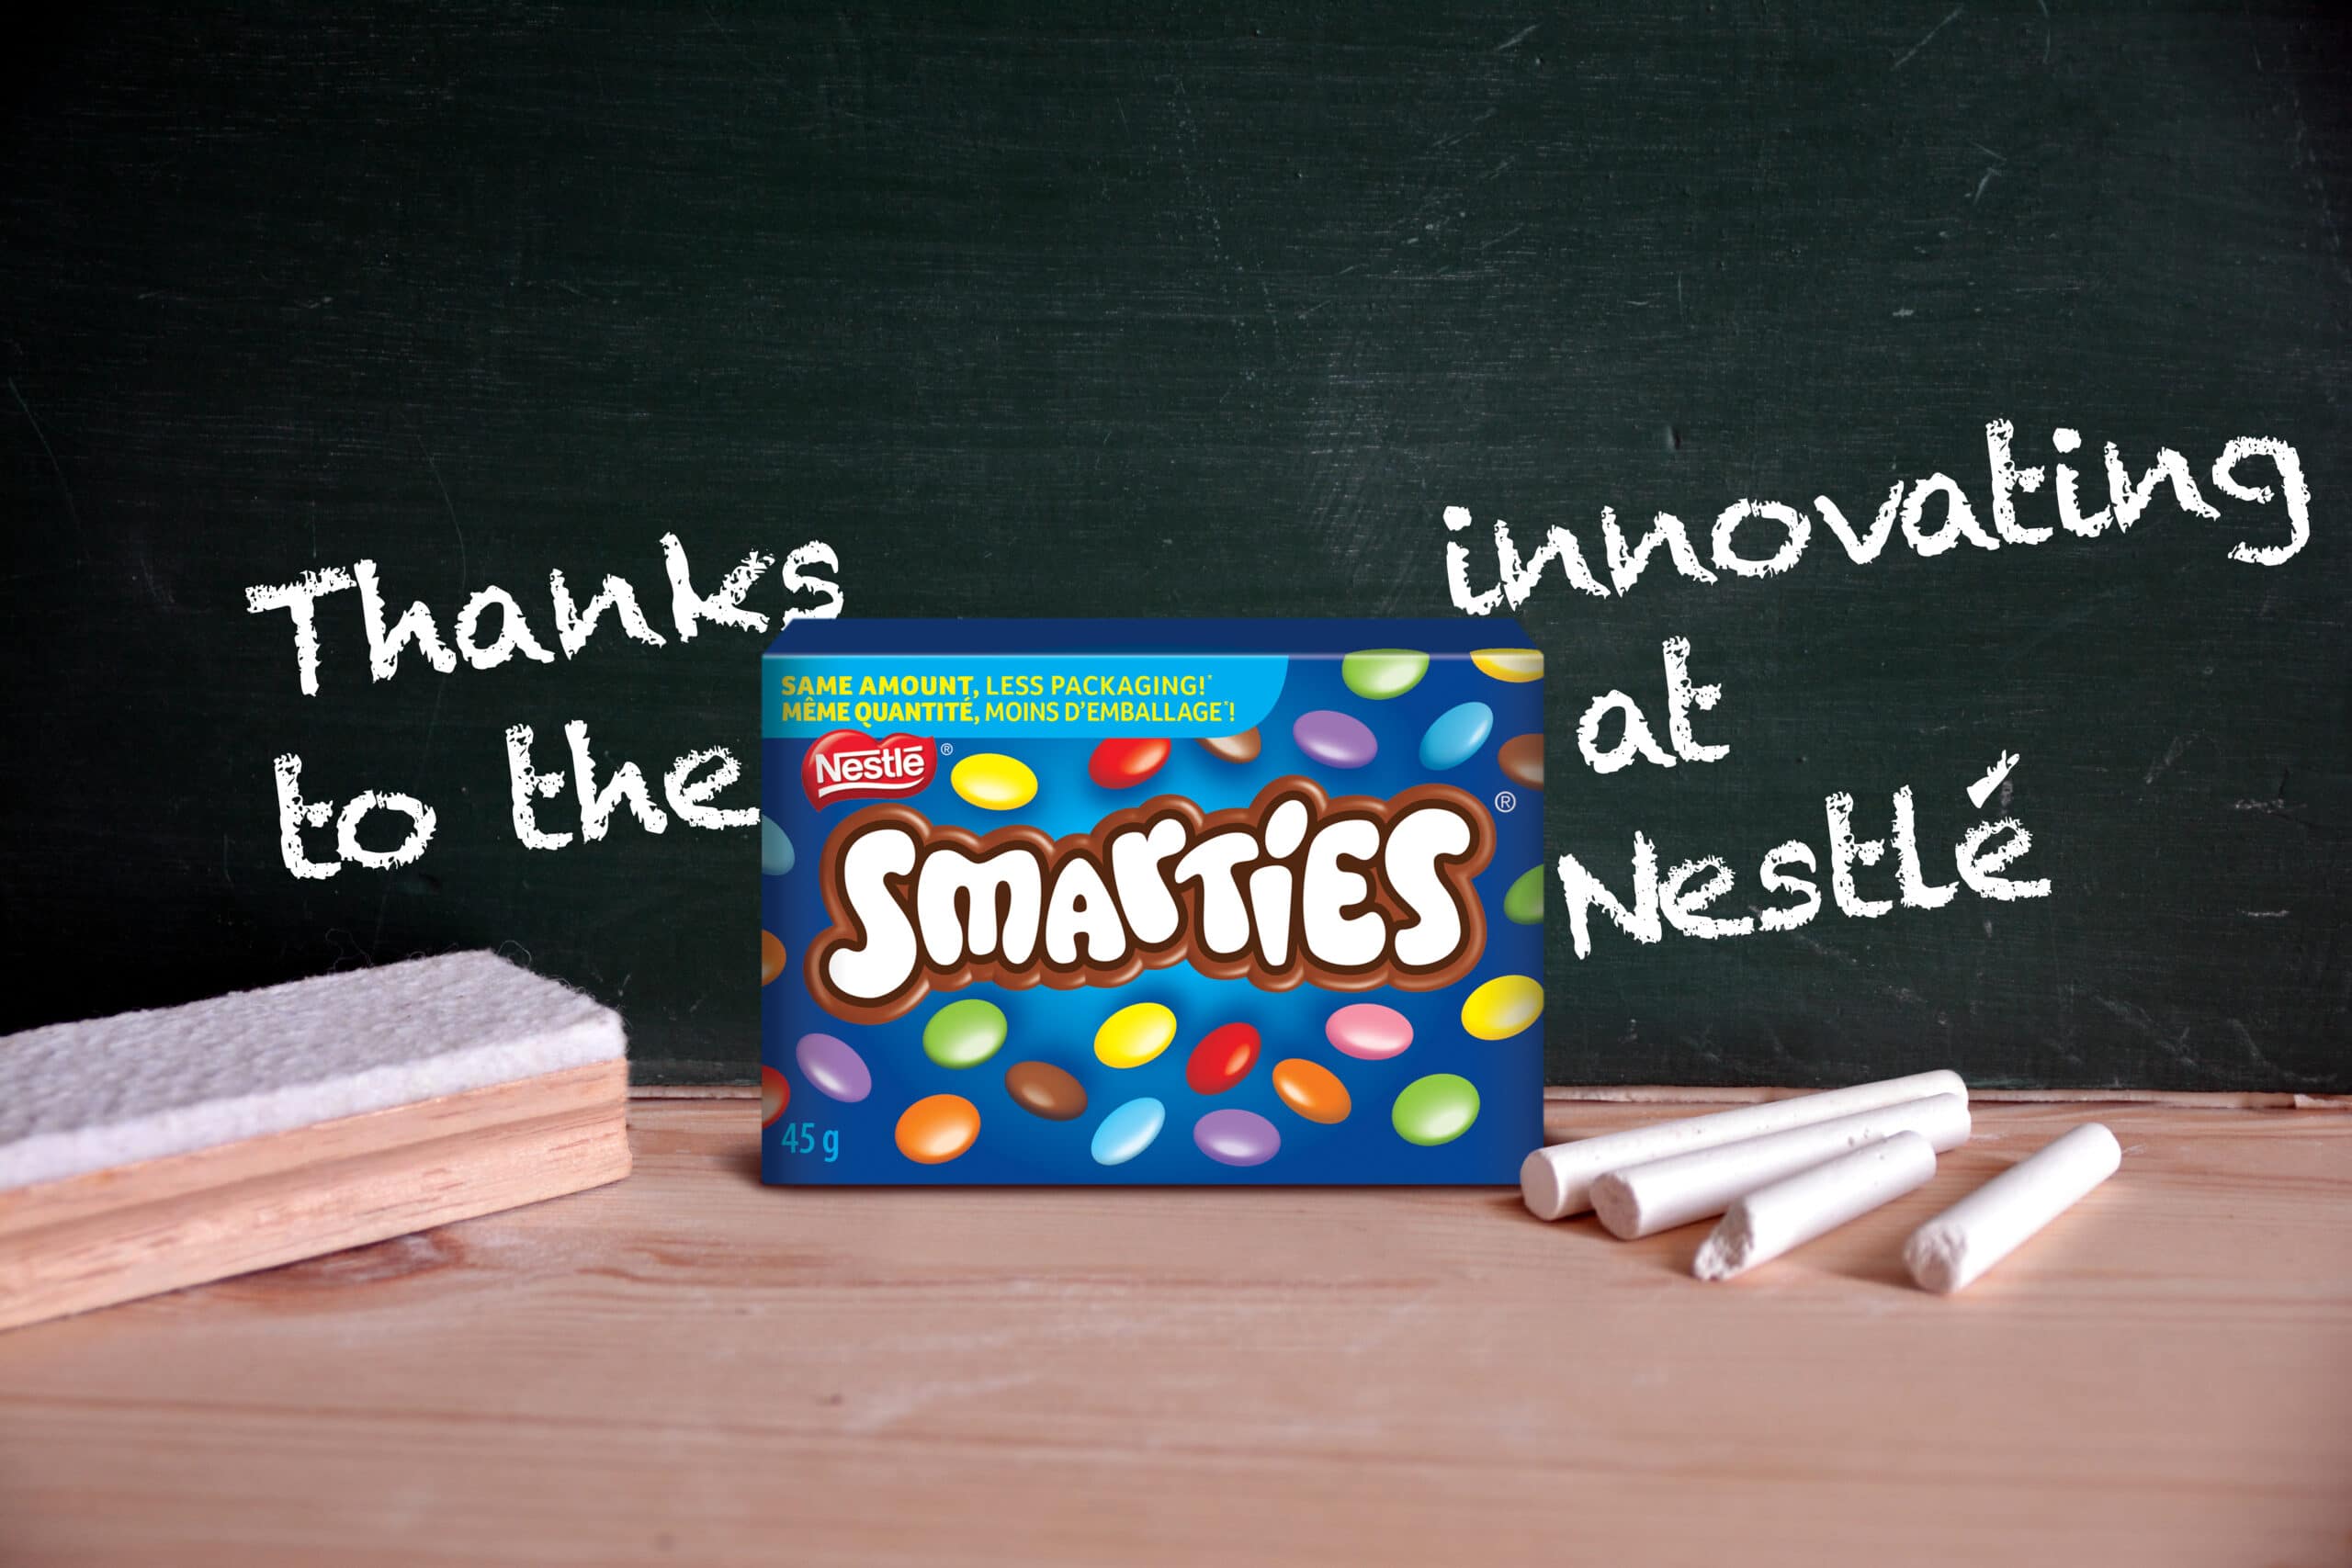 A Smarties box on the table with floating text that connects to the brand logo name which reads, "Thanks to the SMARTIES innovating at Nestlé"